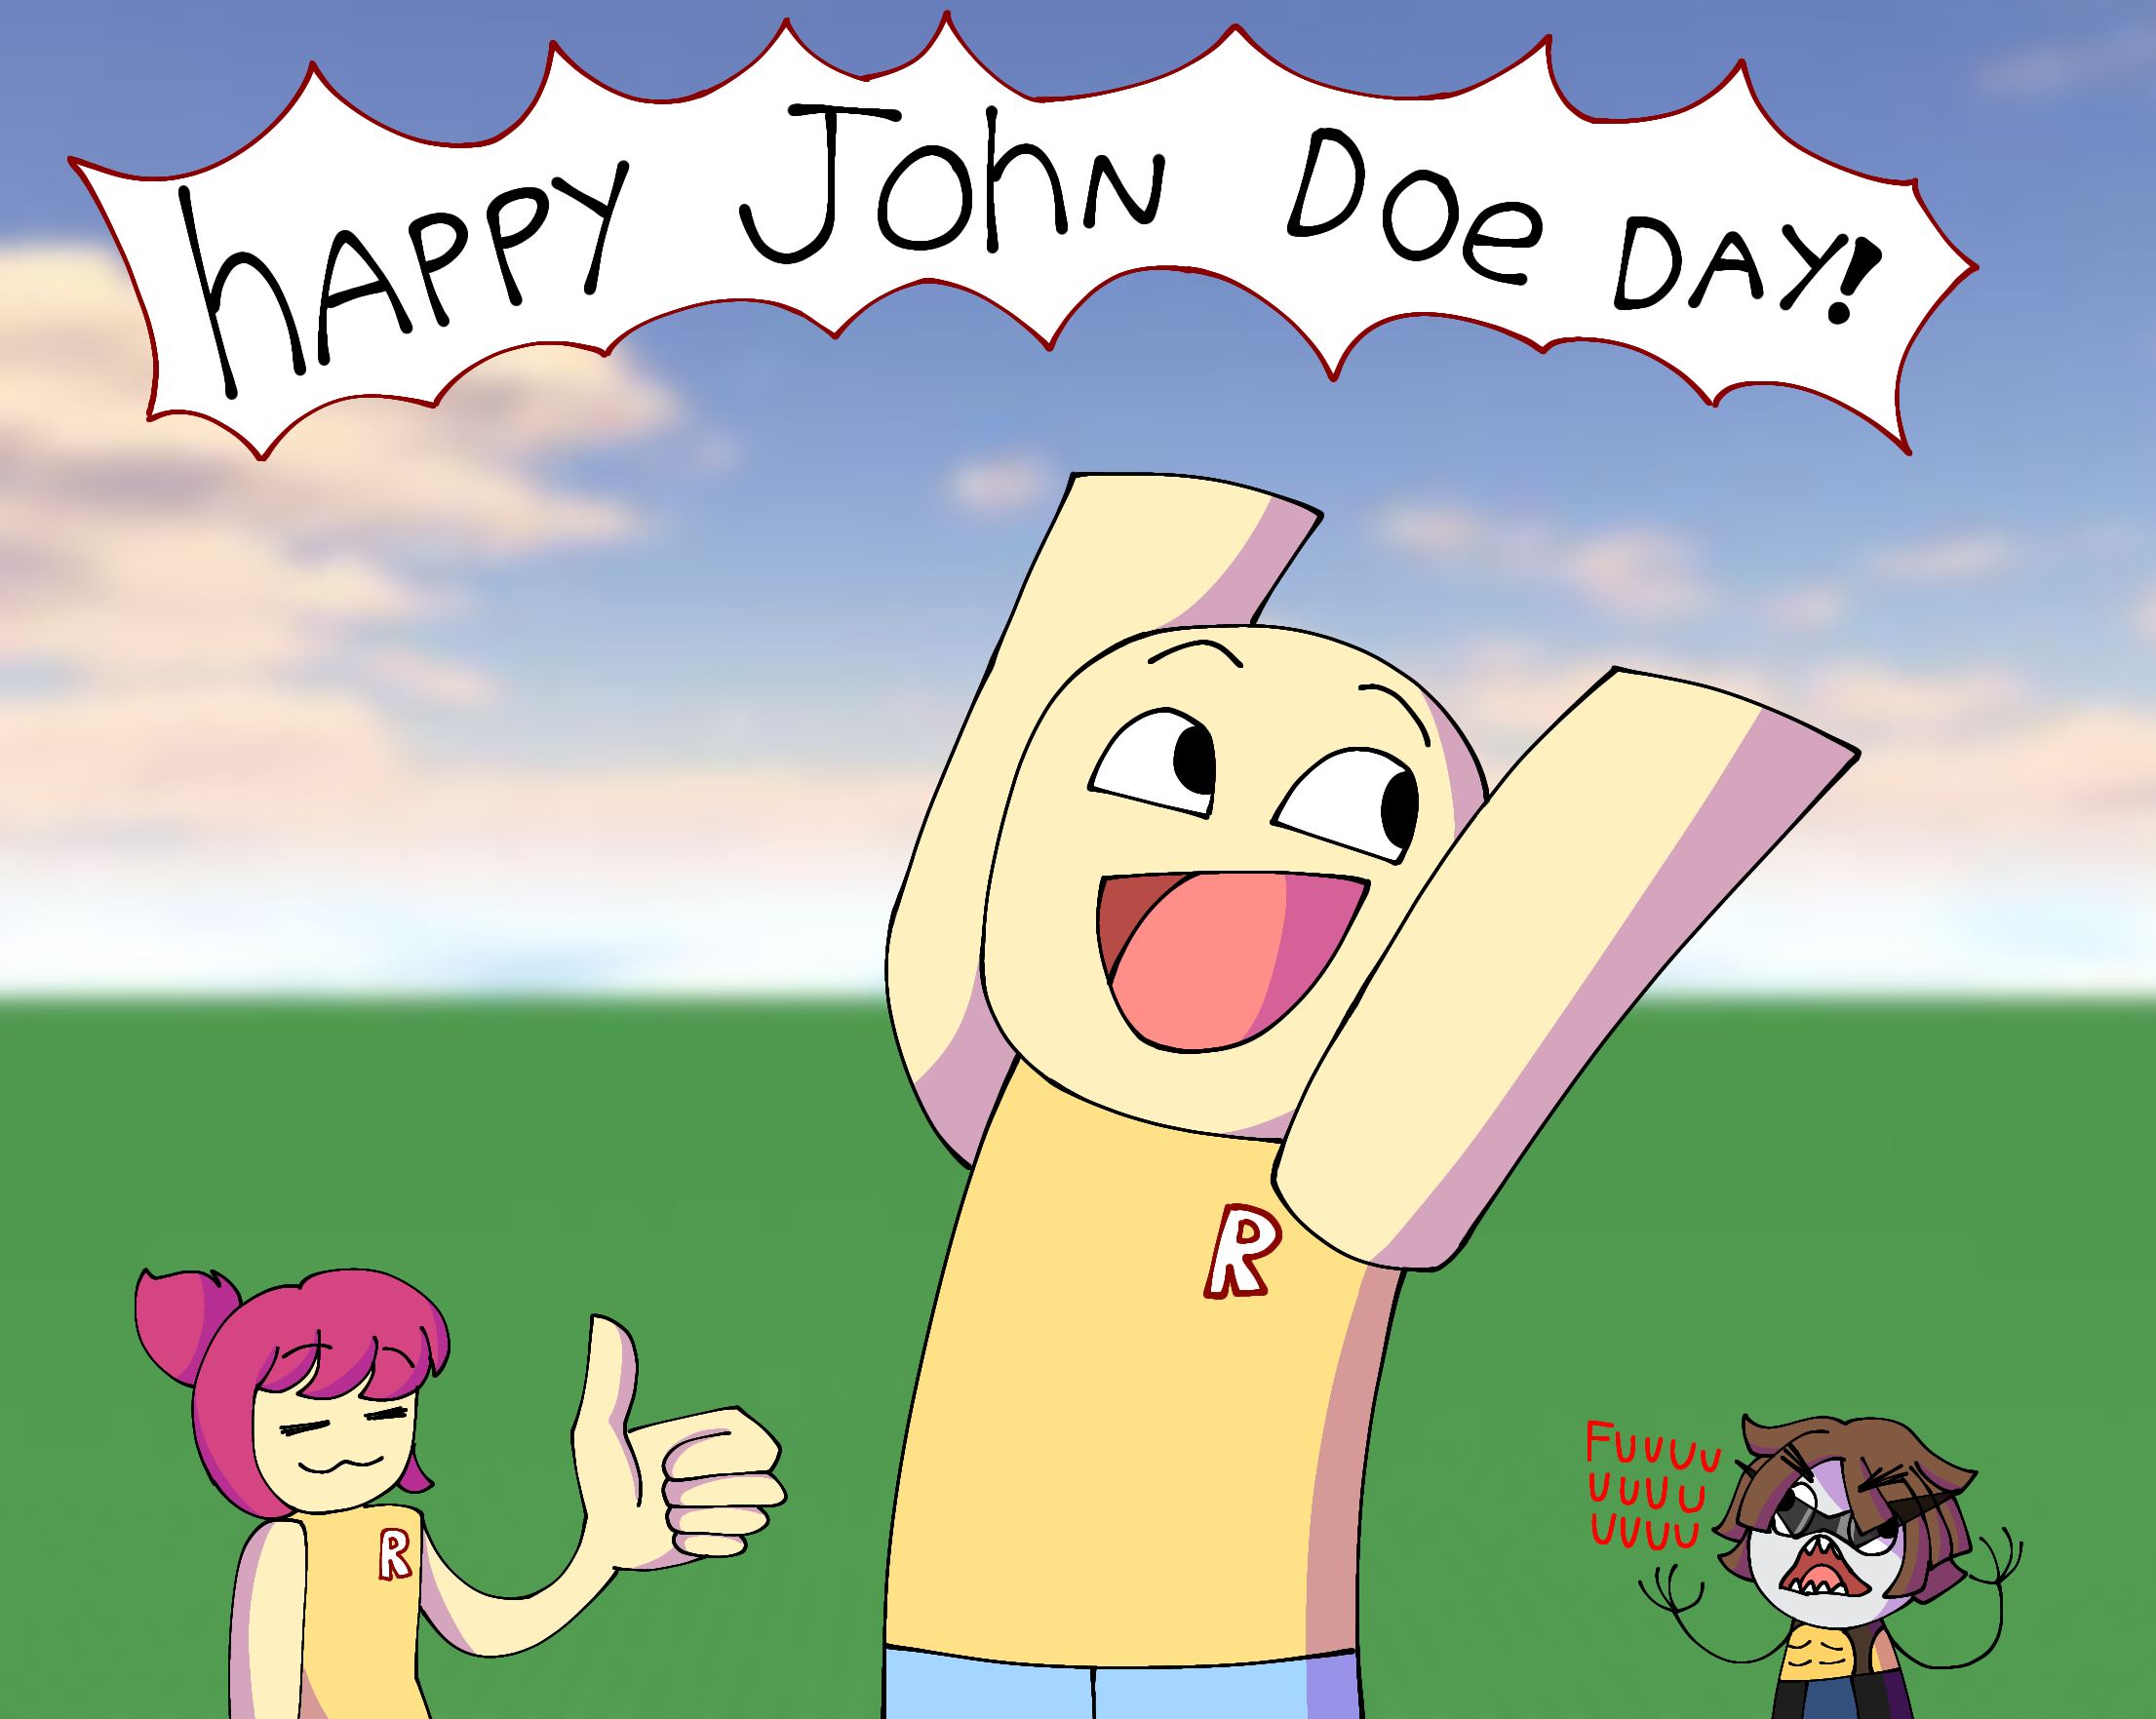 Happy John doe's day (but too late with Tubers93-) by jujuba2007